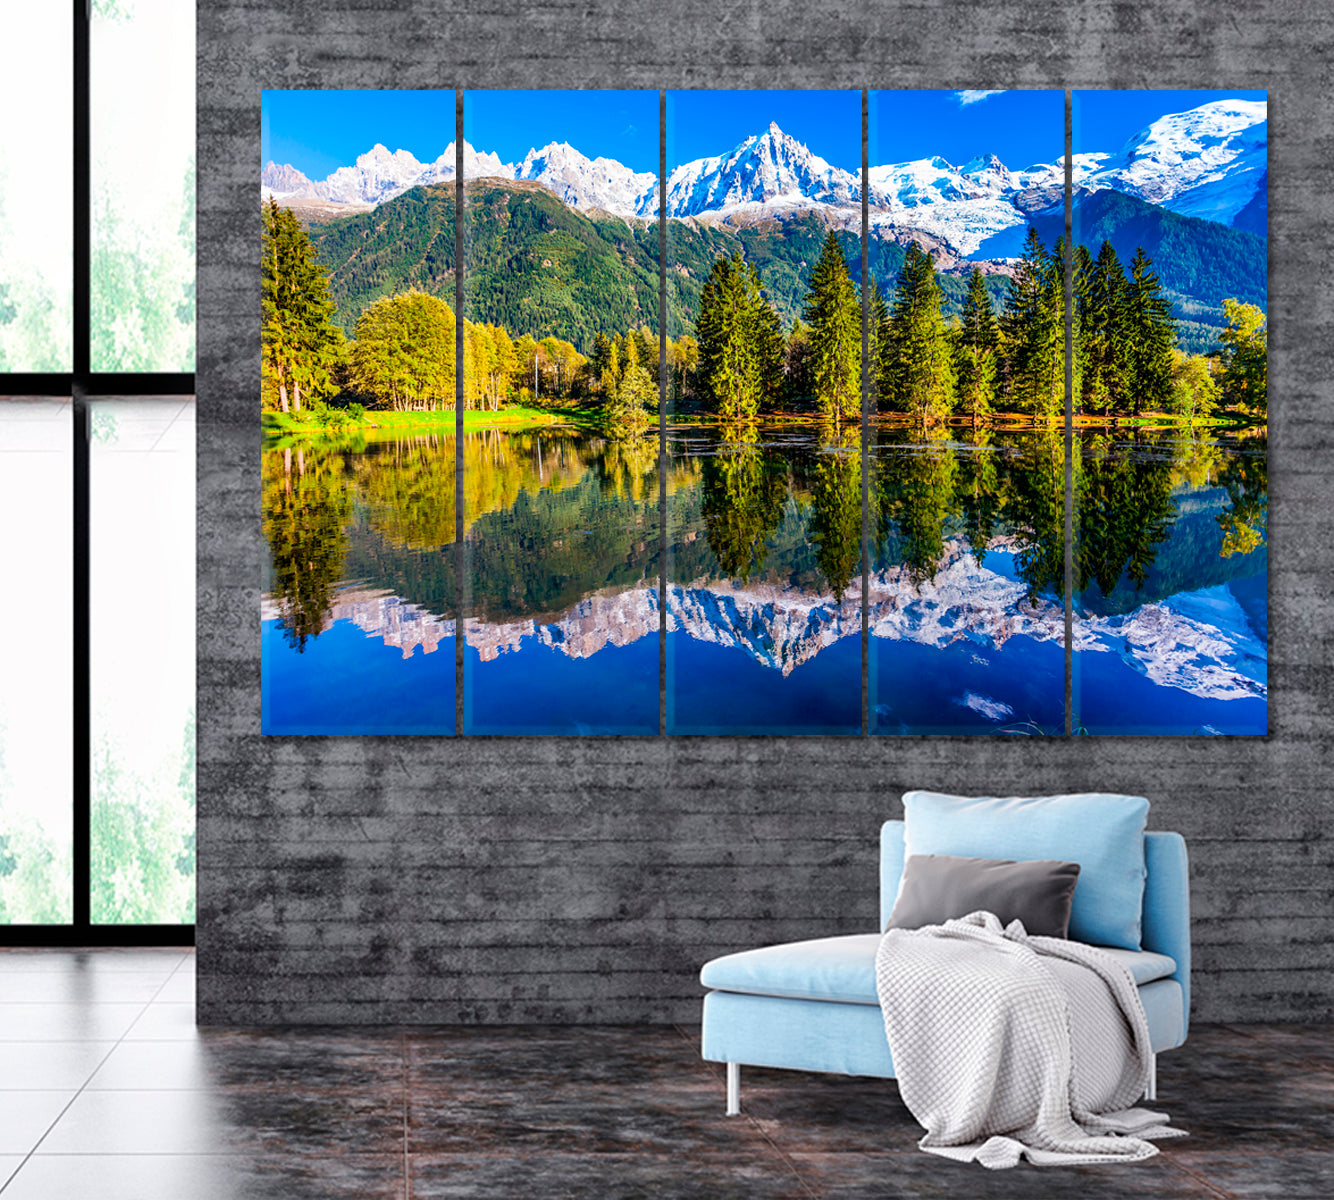 Reflections of Snowy Mountains in Lake Canvas Print ArtLexy 5 Panels 36"x24" inches 